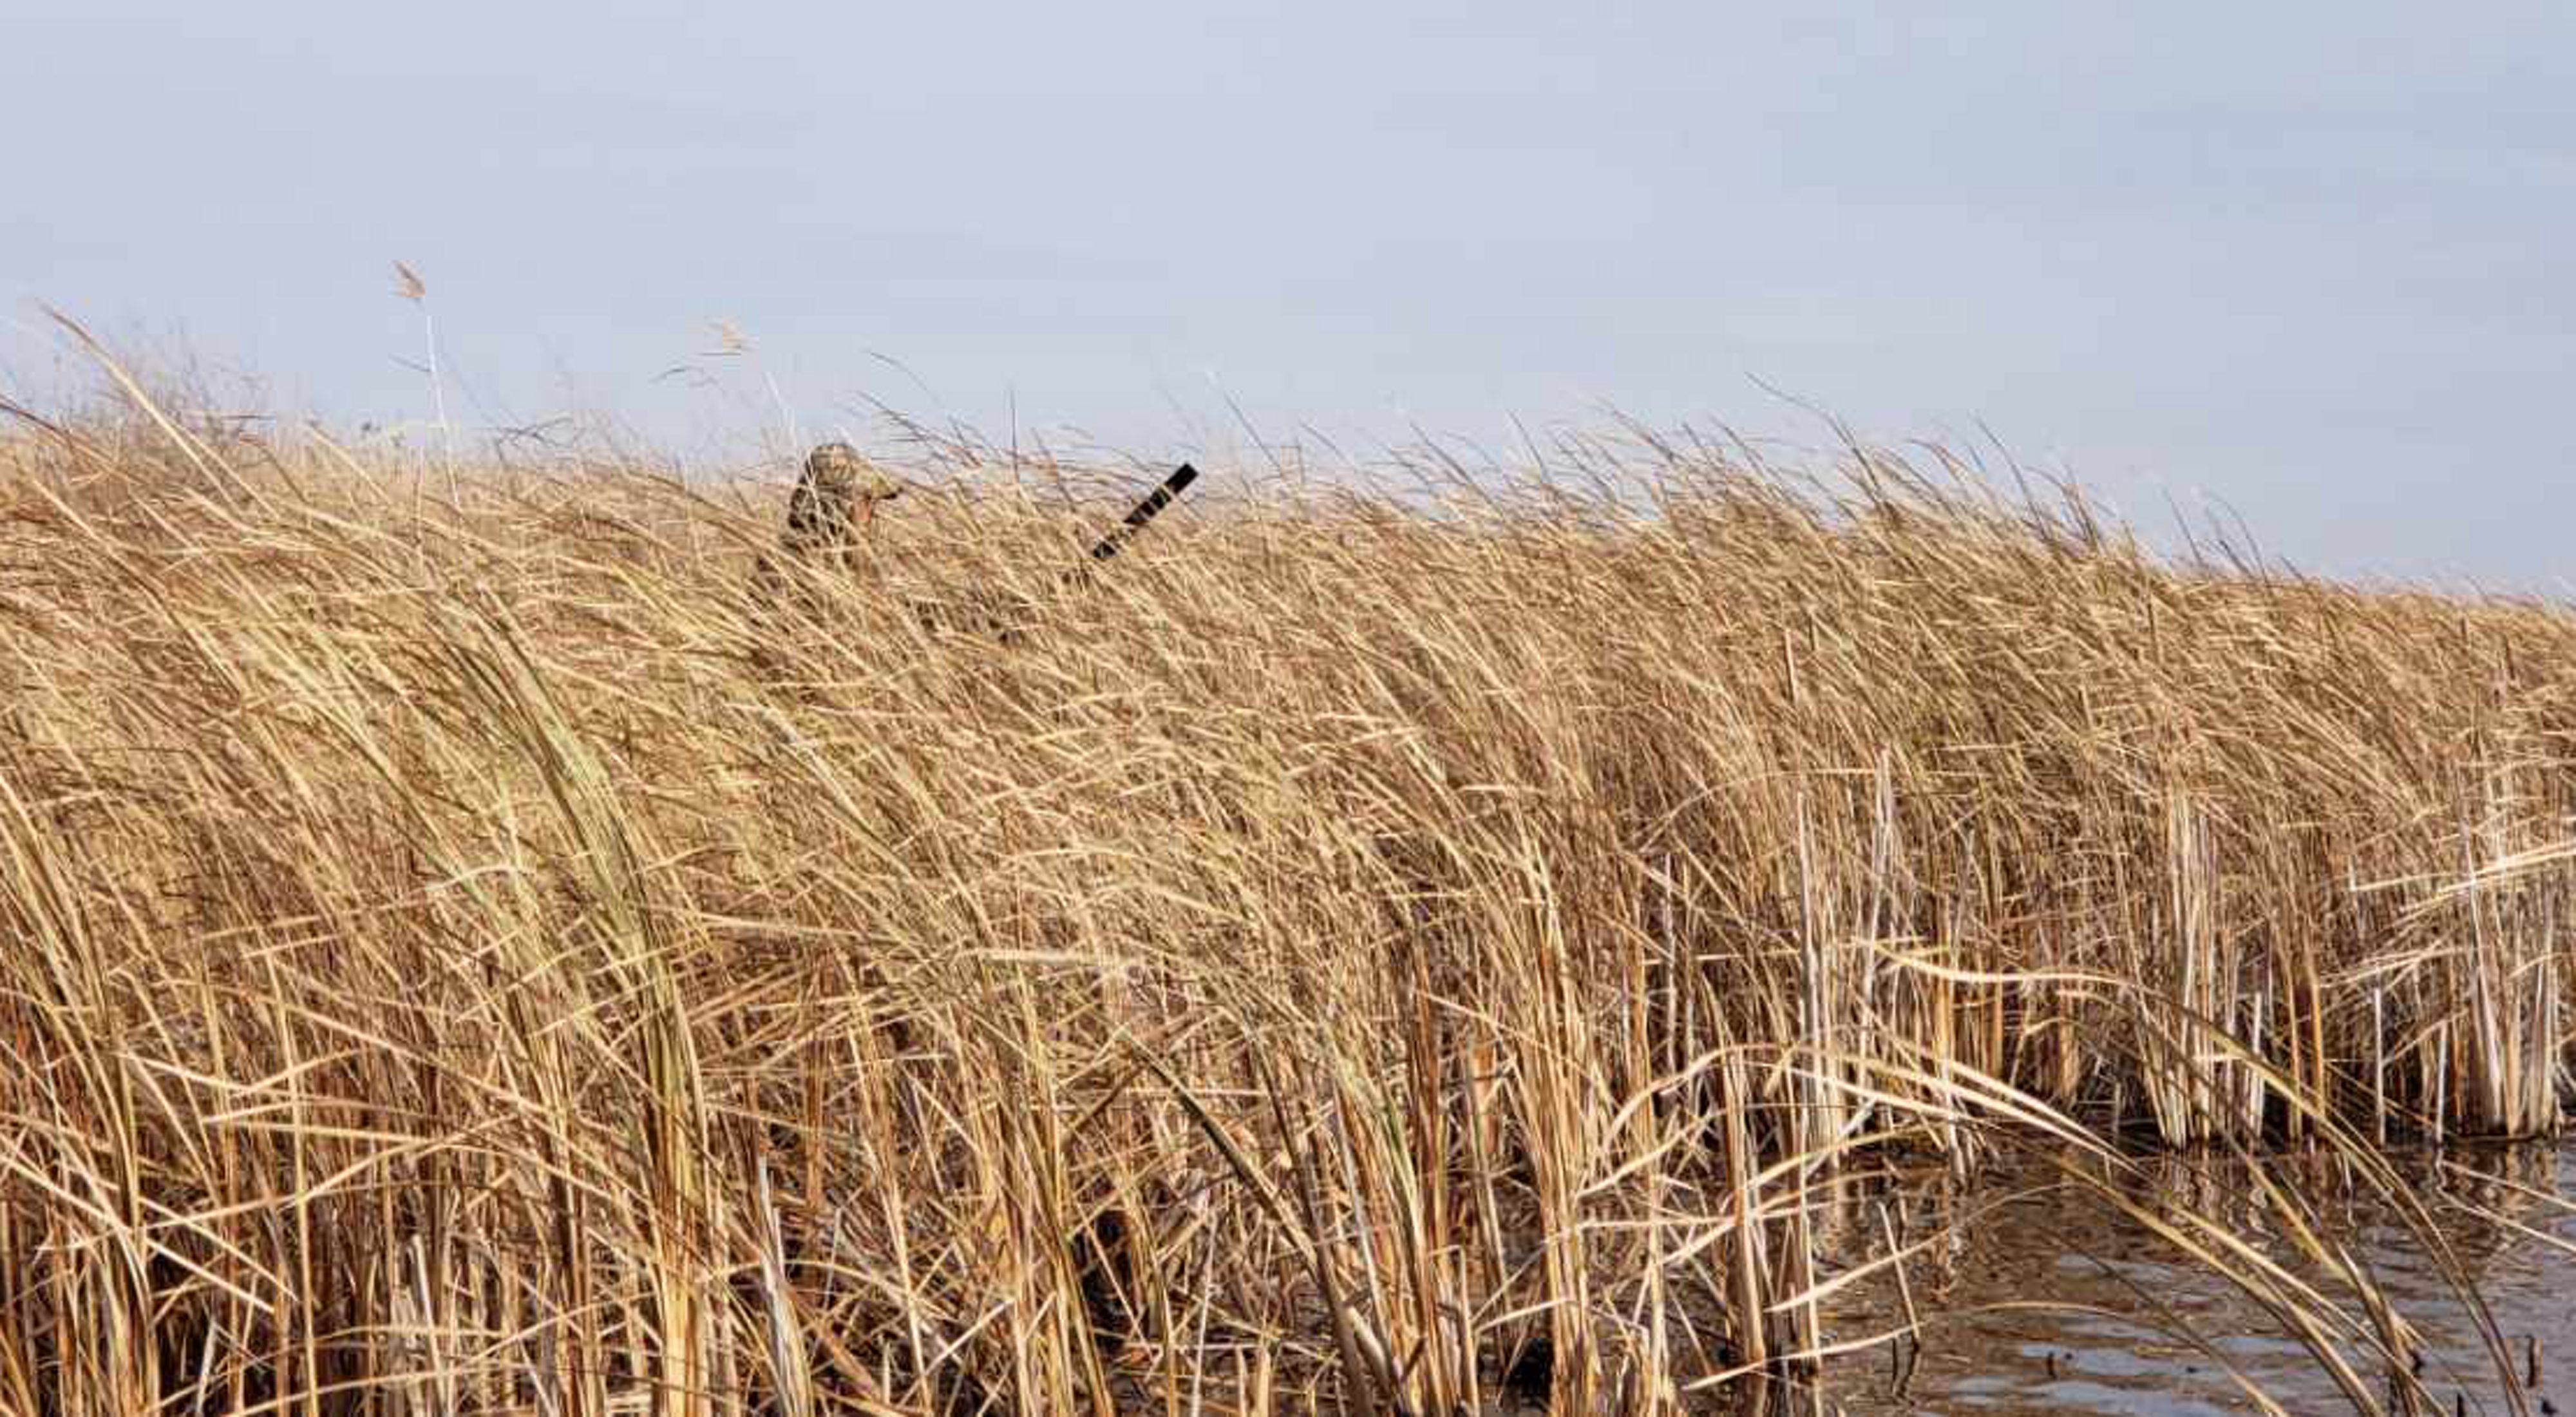 Hunter walking through tall grasses with a rifle in hand.